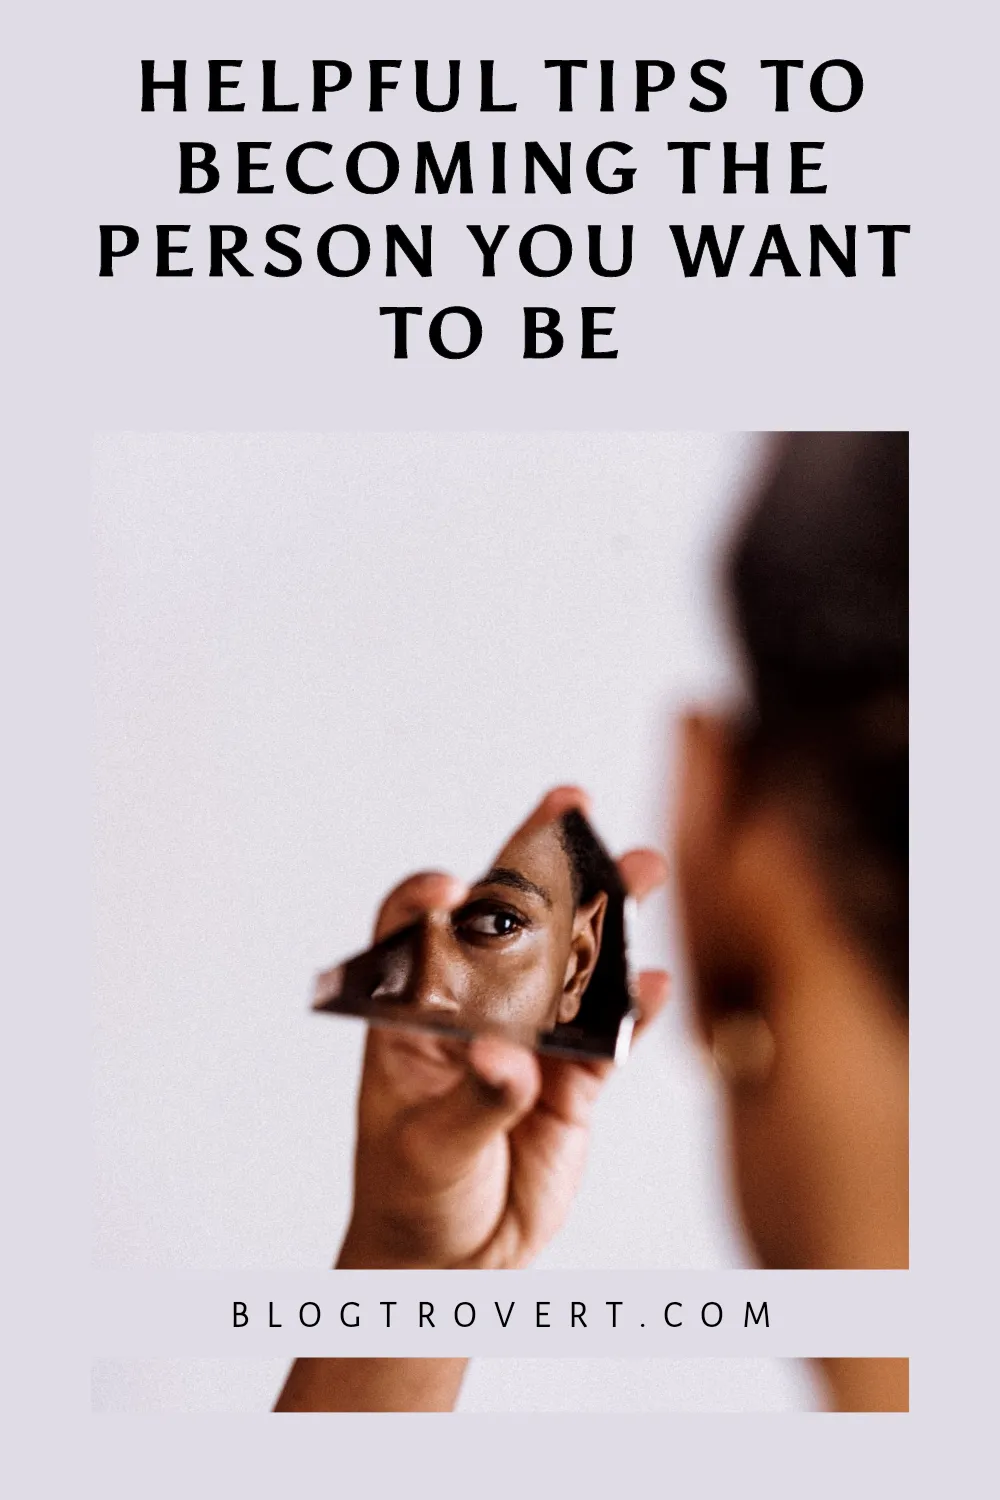 How to become the person you want to be - 17 helpful tips 1